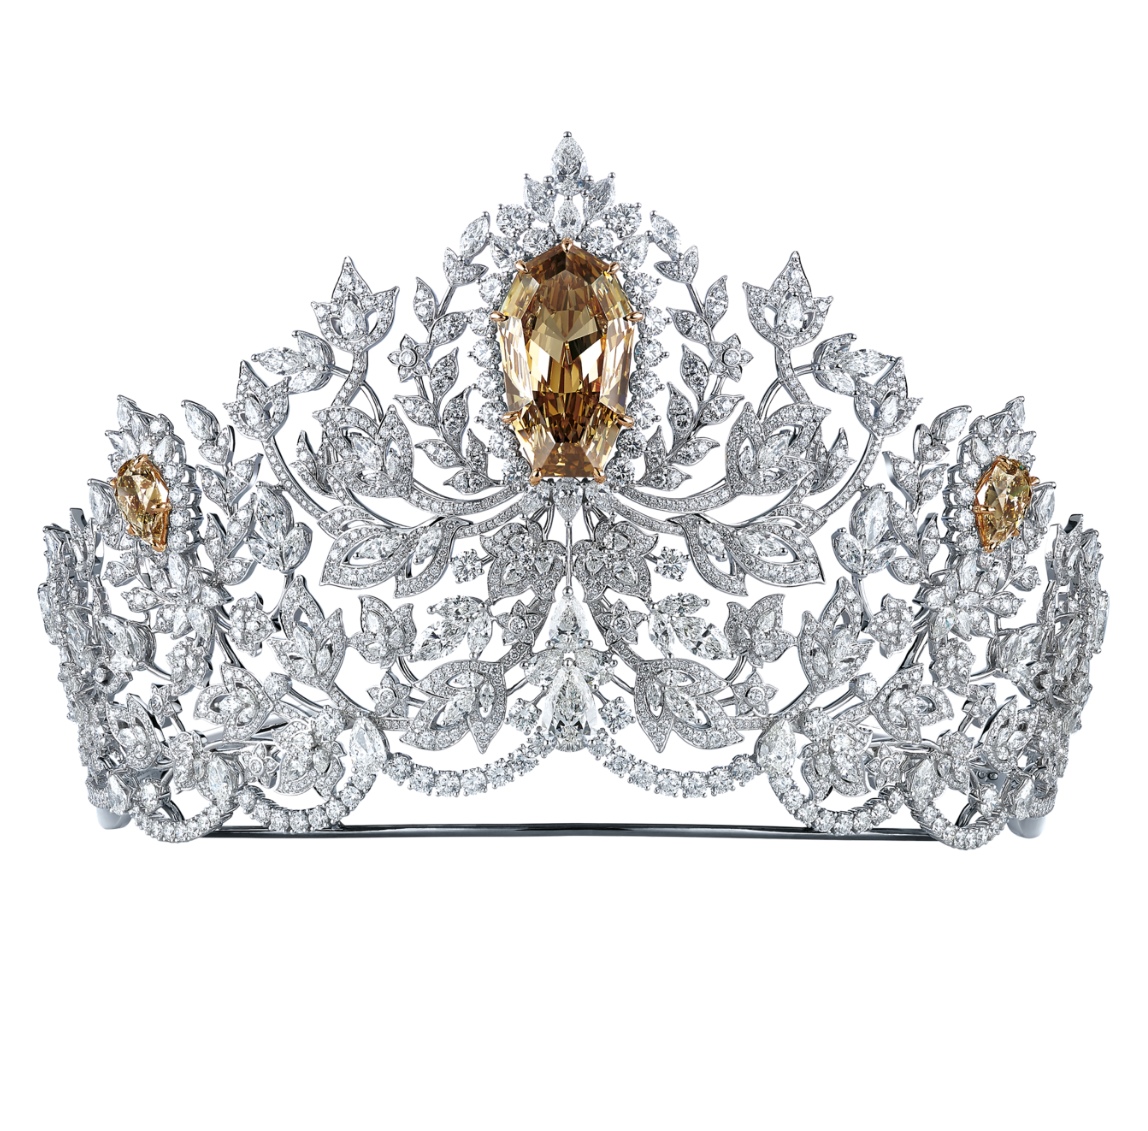 Exquisite Crafted Crowns by Mouawad | Regal Elegance u0026 Luxury